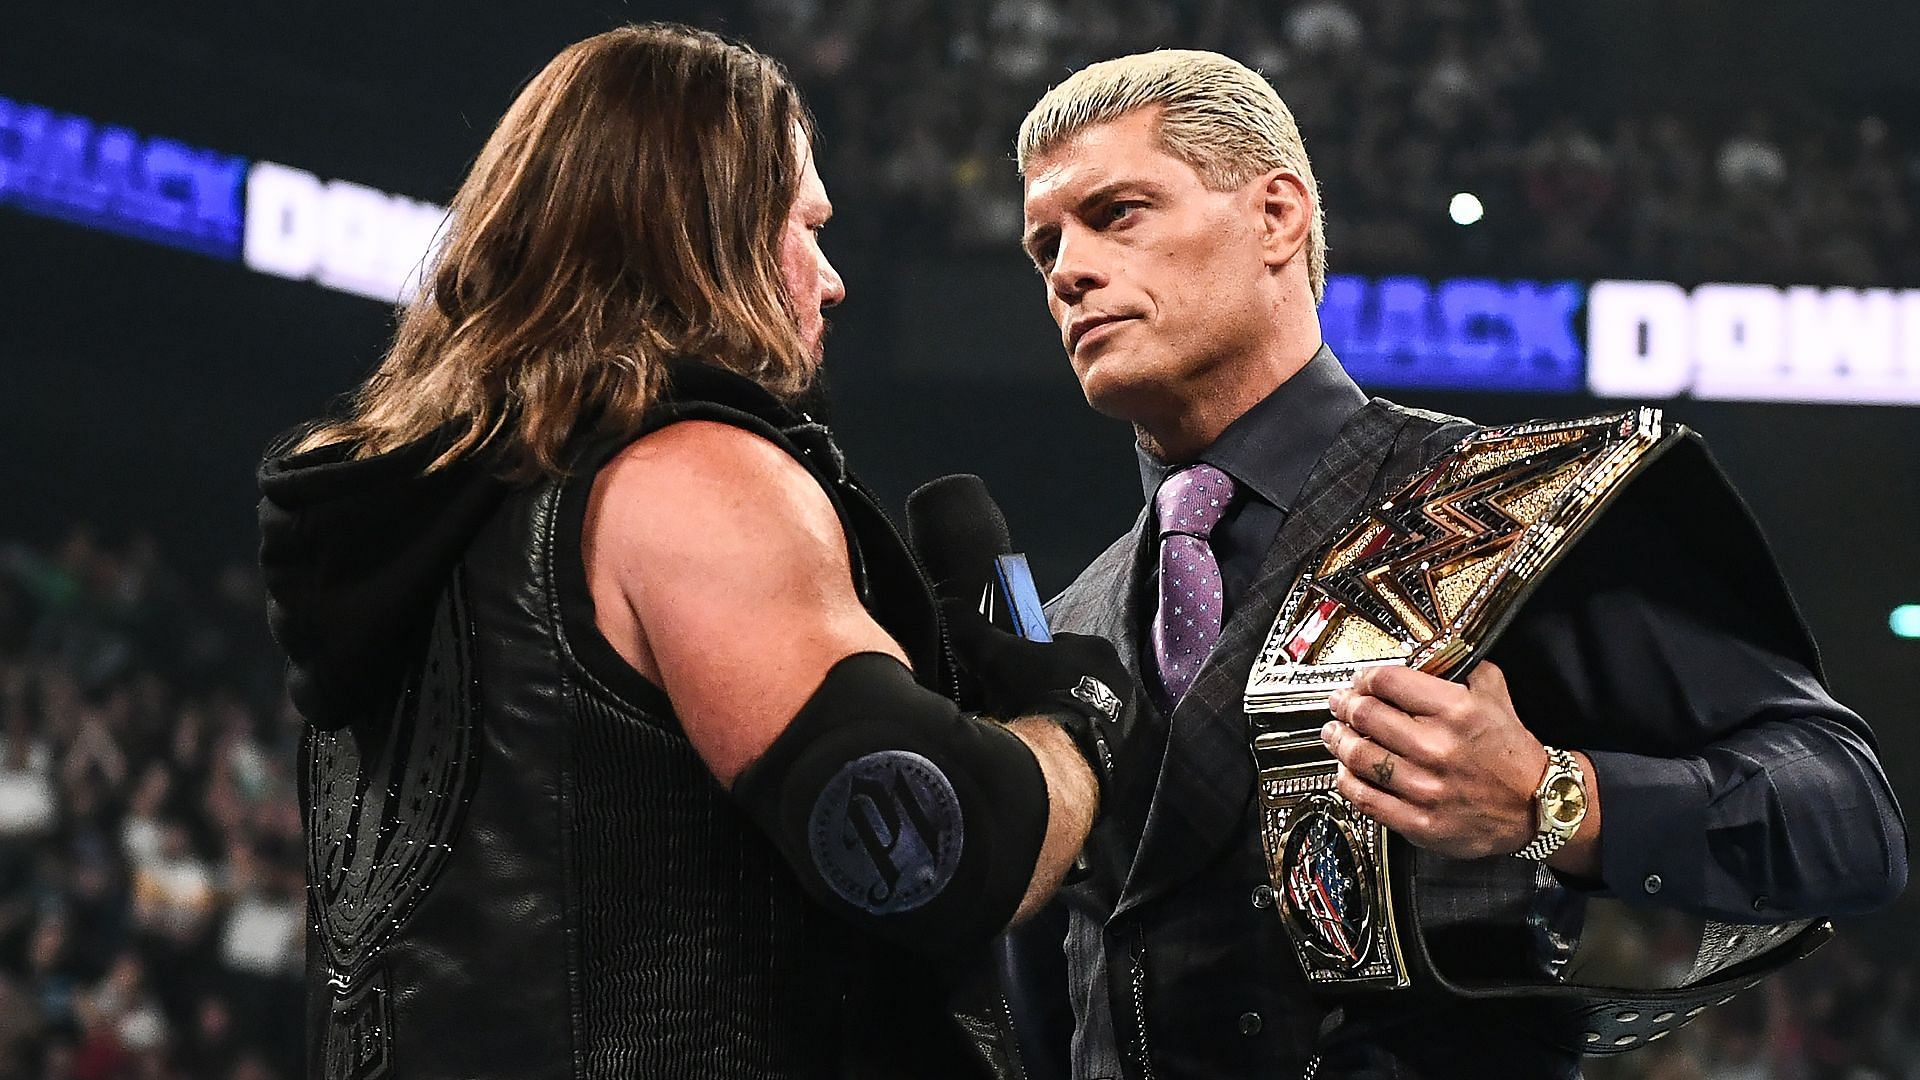 Cody Rhodes and AJ Styles ahead of their championship match.